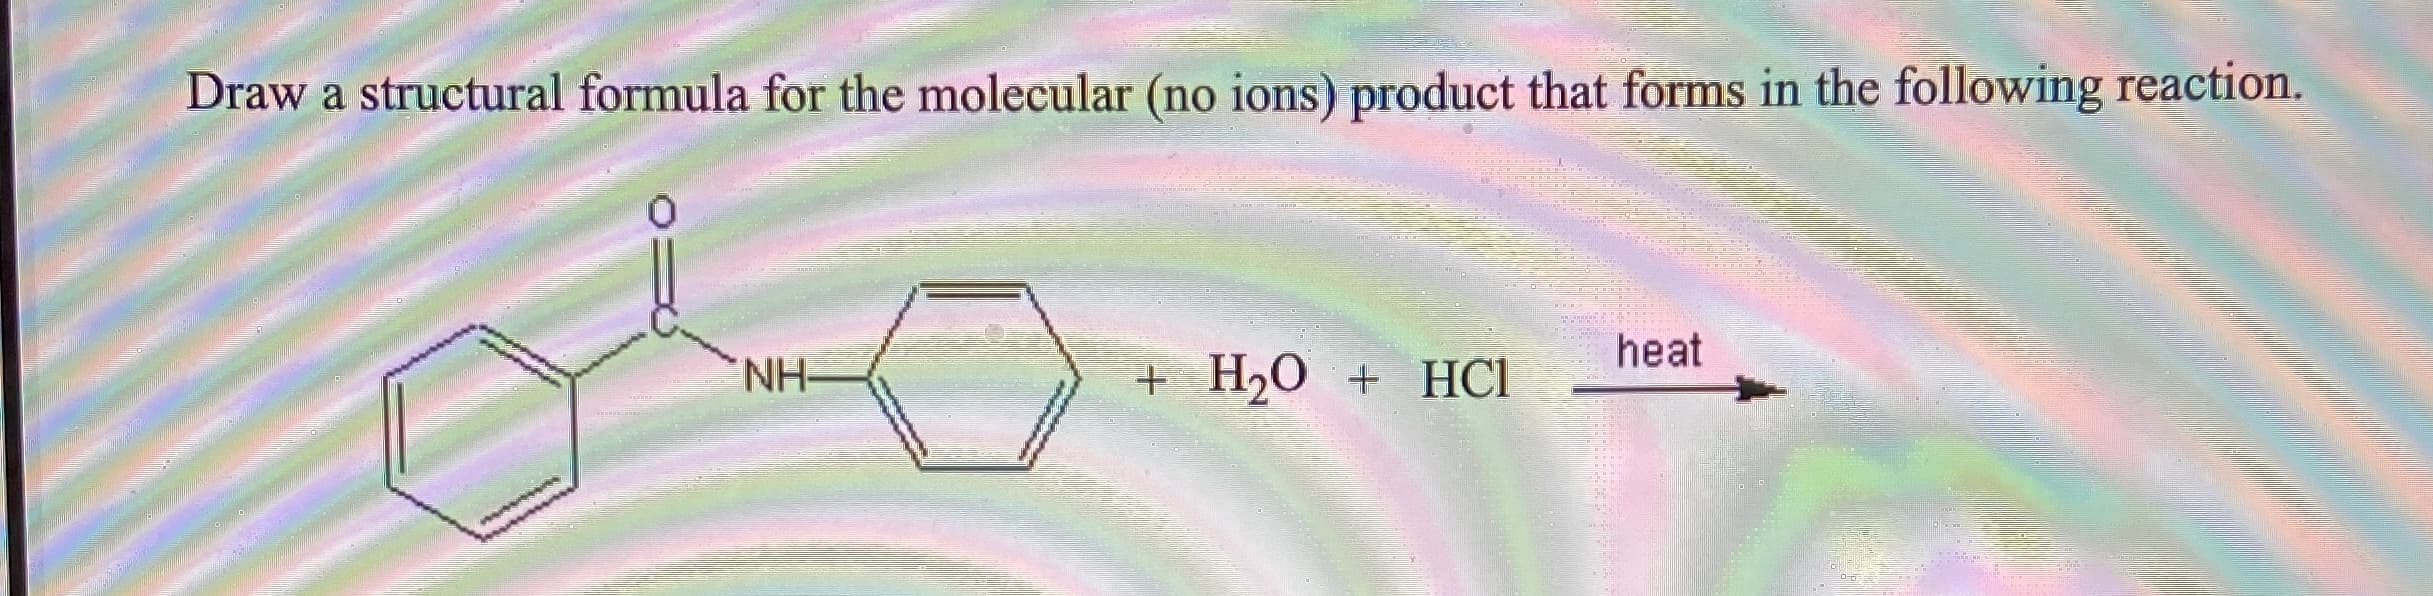 Draw a structural formula for the molecular (no ions) product that forms in the following reaction.
heat
NH-
+ H20 + HCI
